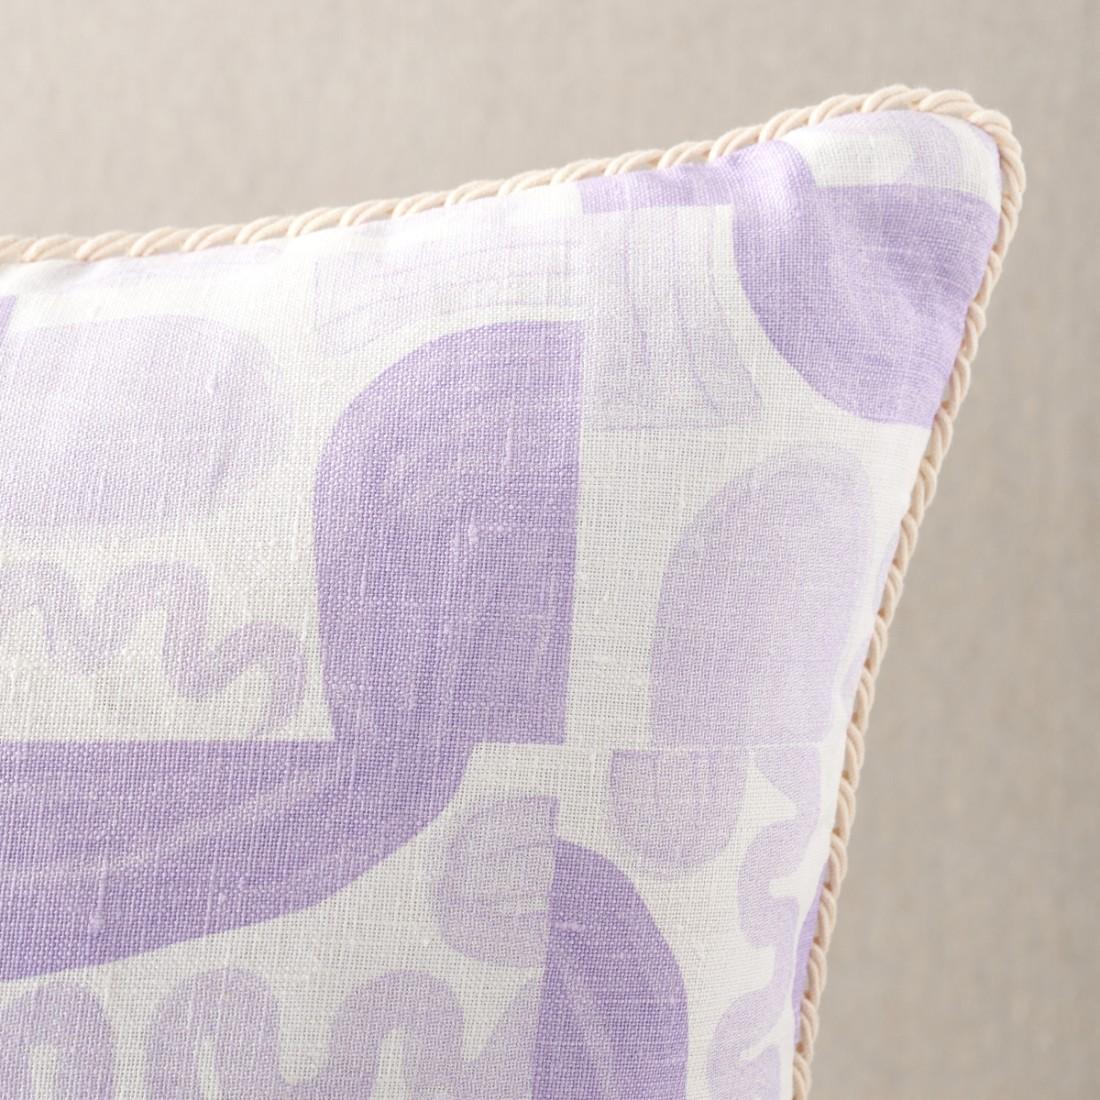 The Maple Wisteria lumbar pillow features original artwork by Bonnie Ashley of Bonnie & Neal, printed on white linen. The reverse of the cushion features the same design printed on oat linen. The pillow is finished with white cord and includes a